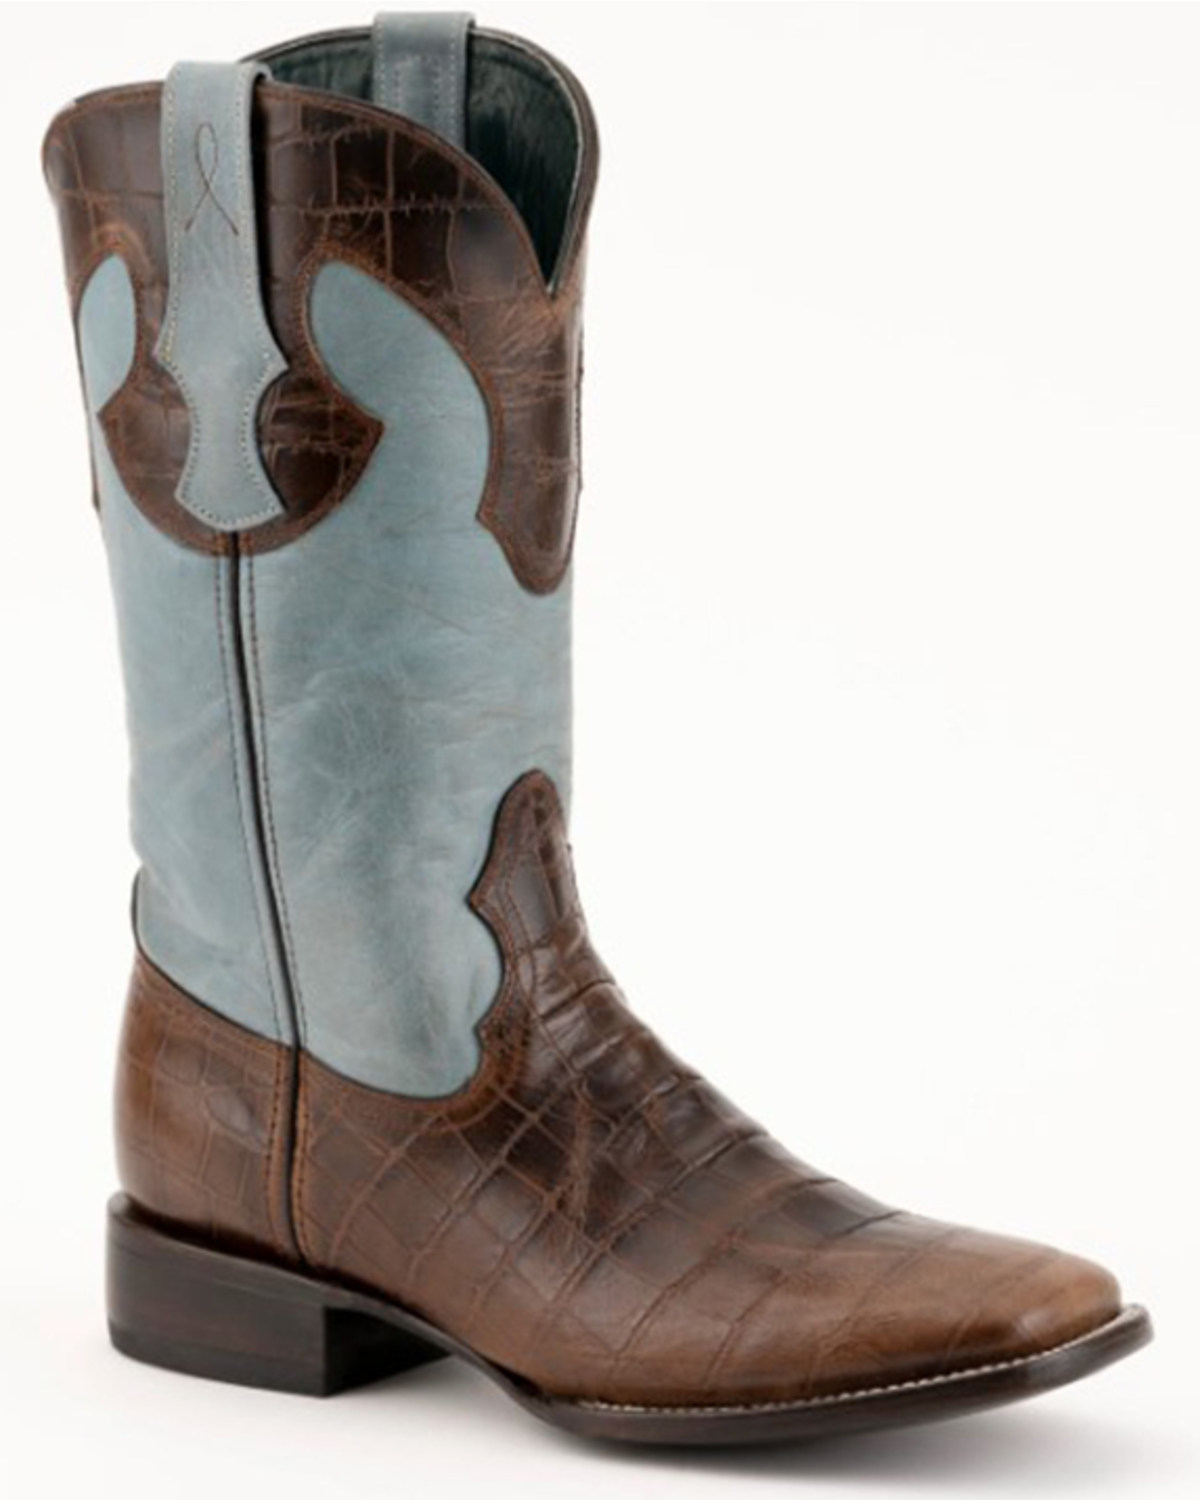 Ferrini Men's Mustang Cowhide Alligator Belly Western Boots - Broad Square Toe